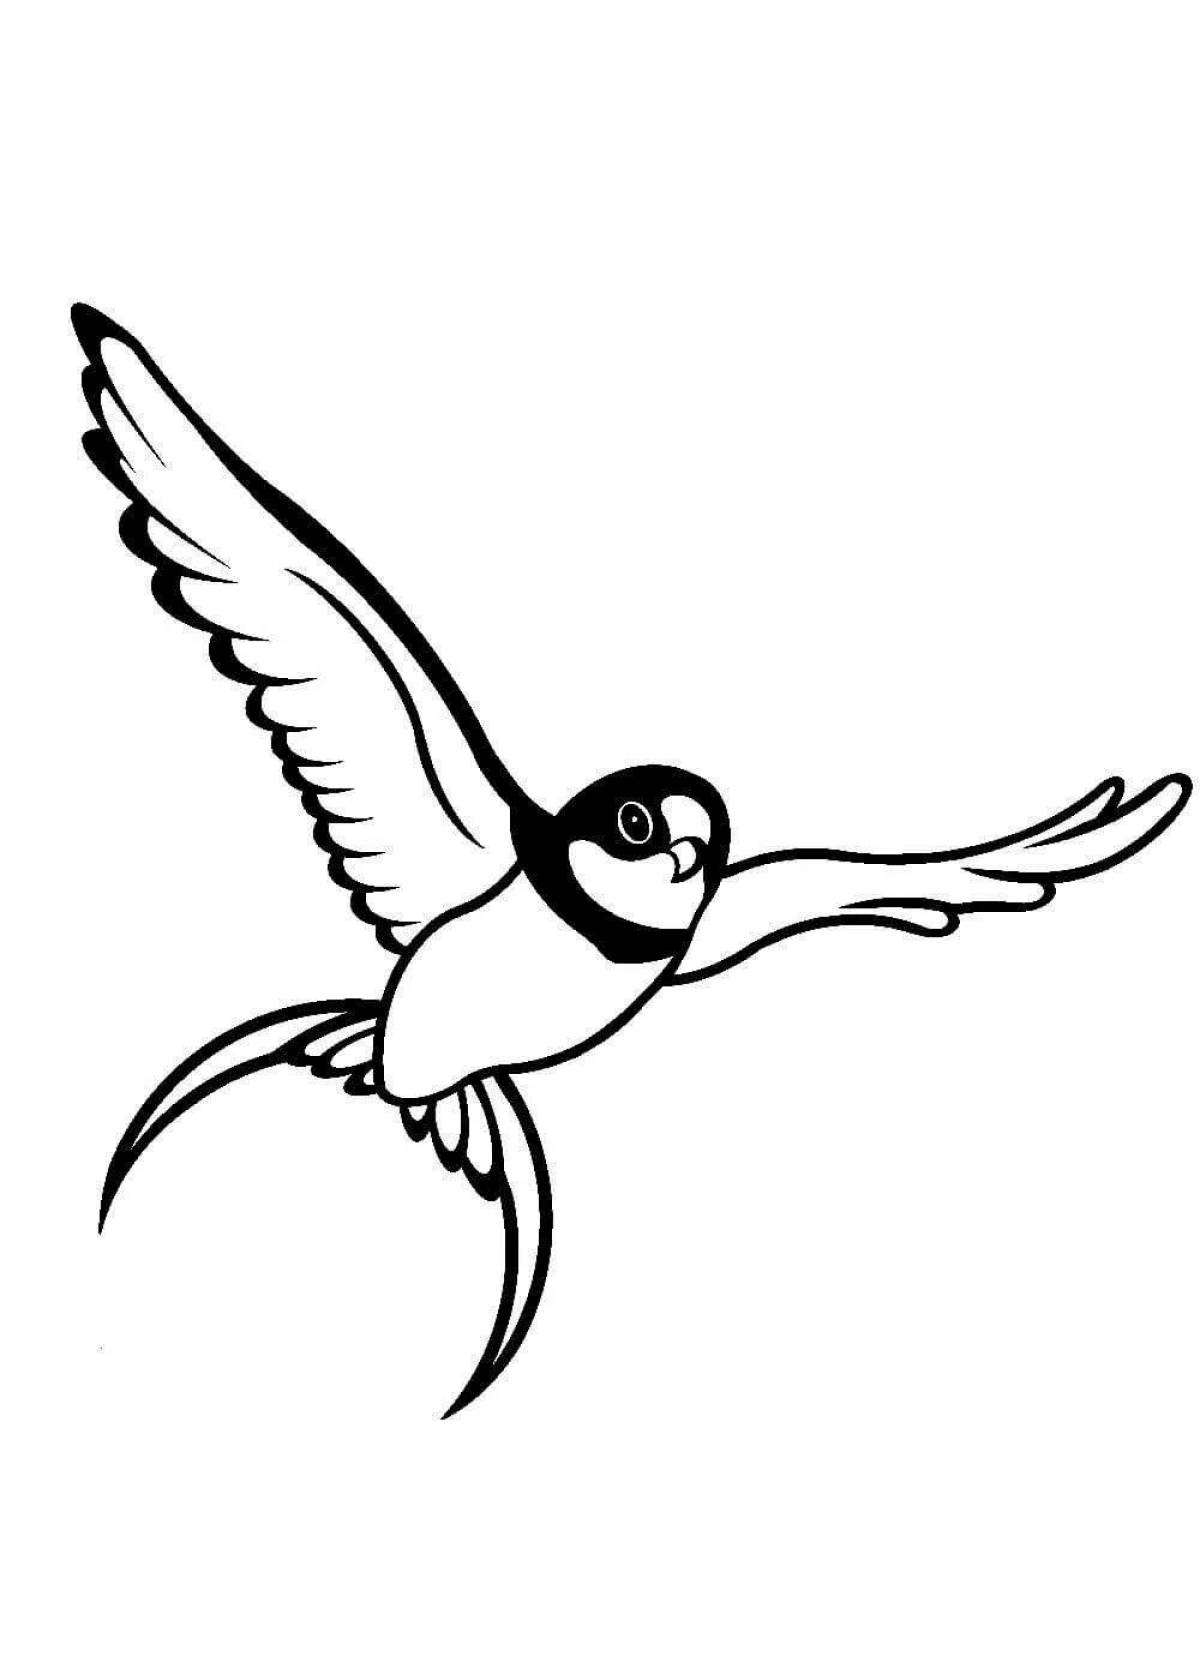 Glowing swallow with a letter